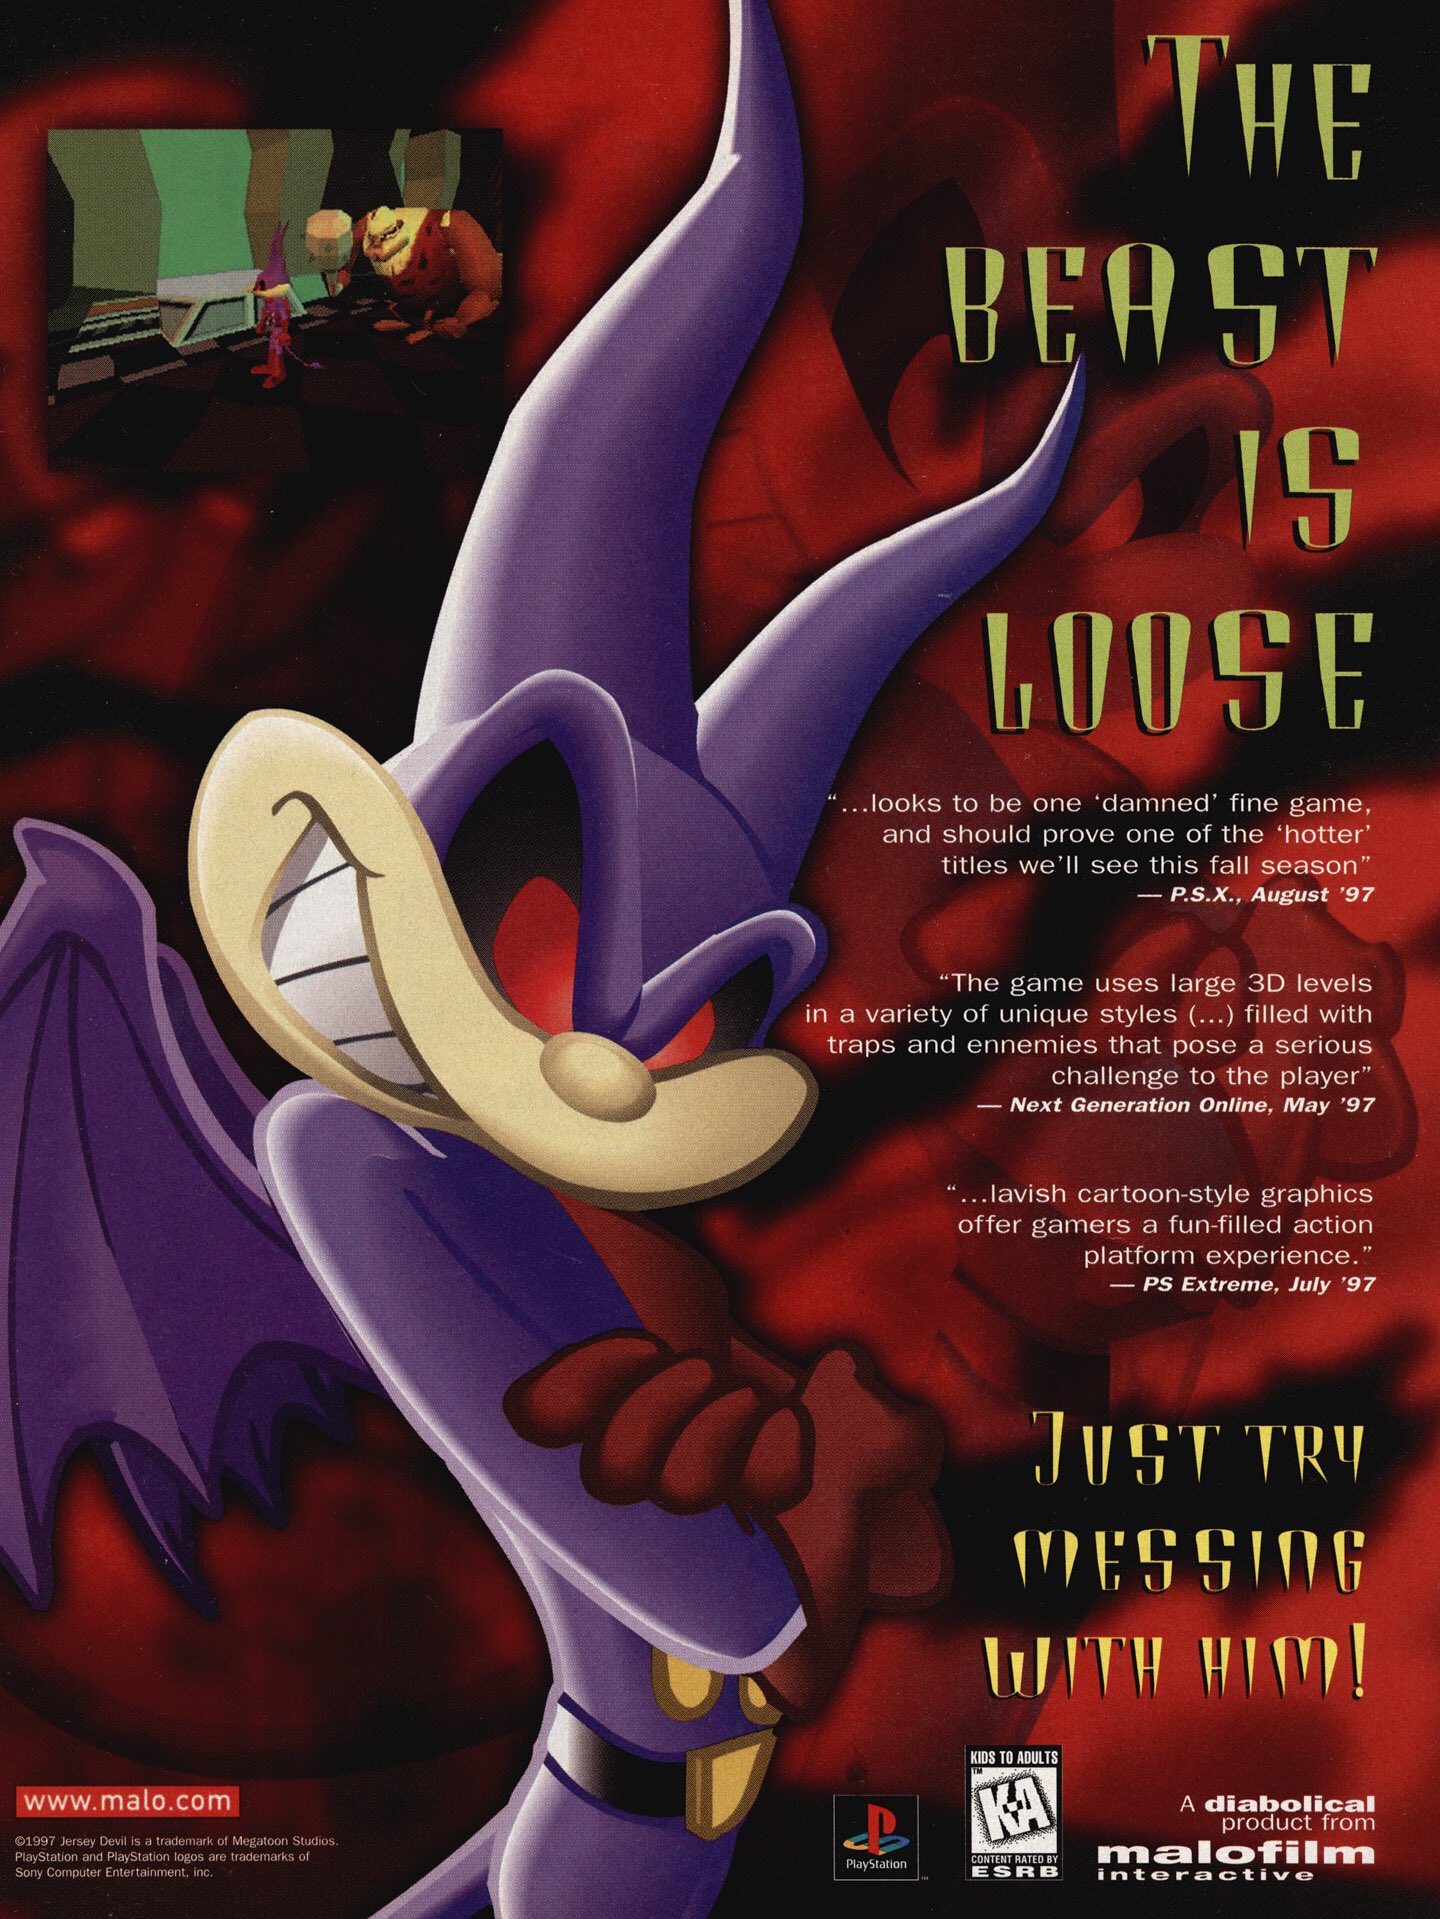 VideoGameArt&Tidbits on Twitter: "Jersey Devil - two-page PlayStation ad.  https://t.co/cWHYuXMbXL" / Twitter